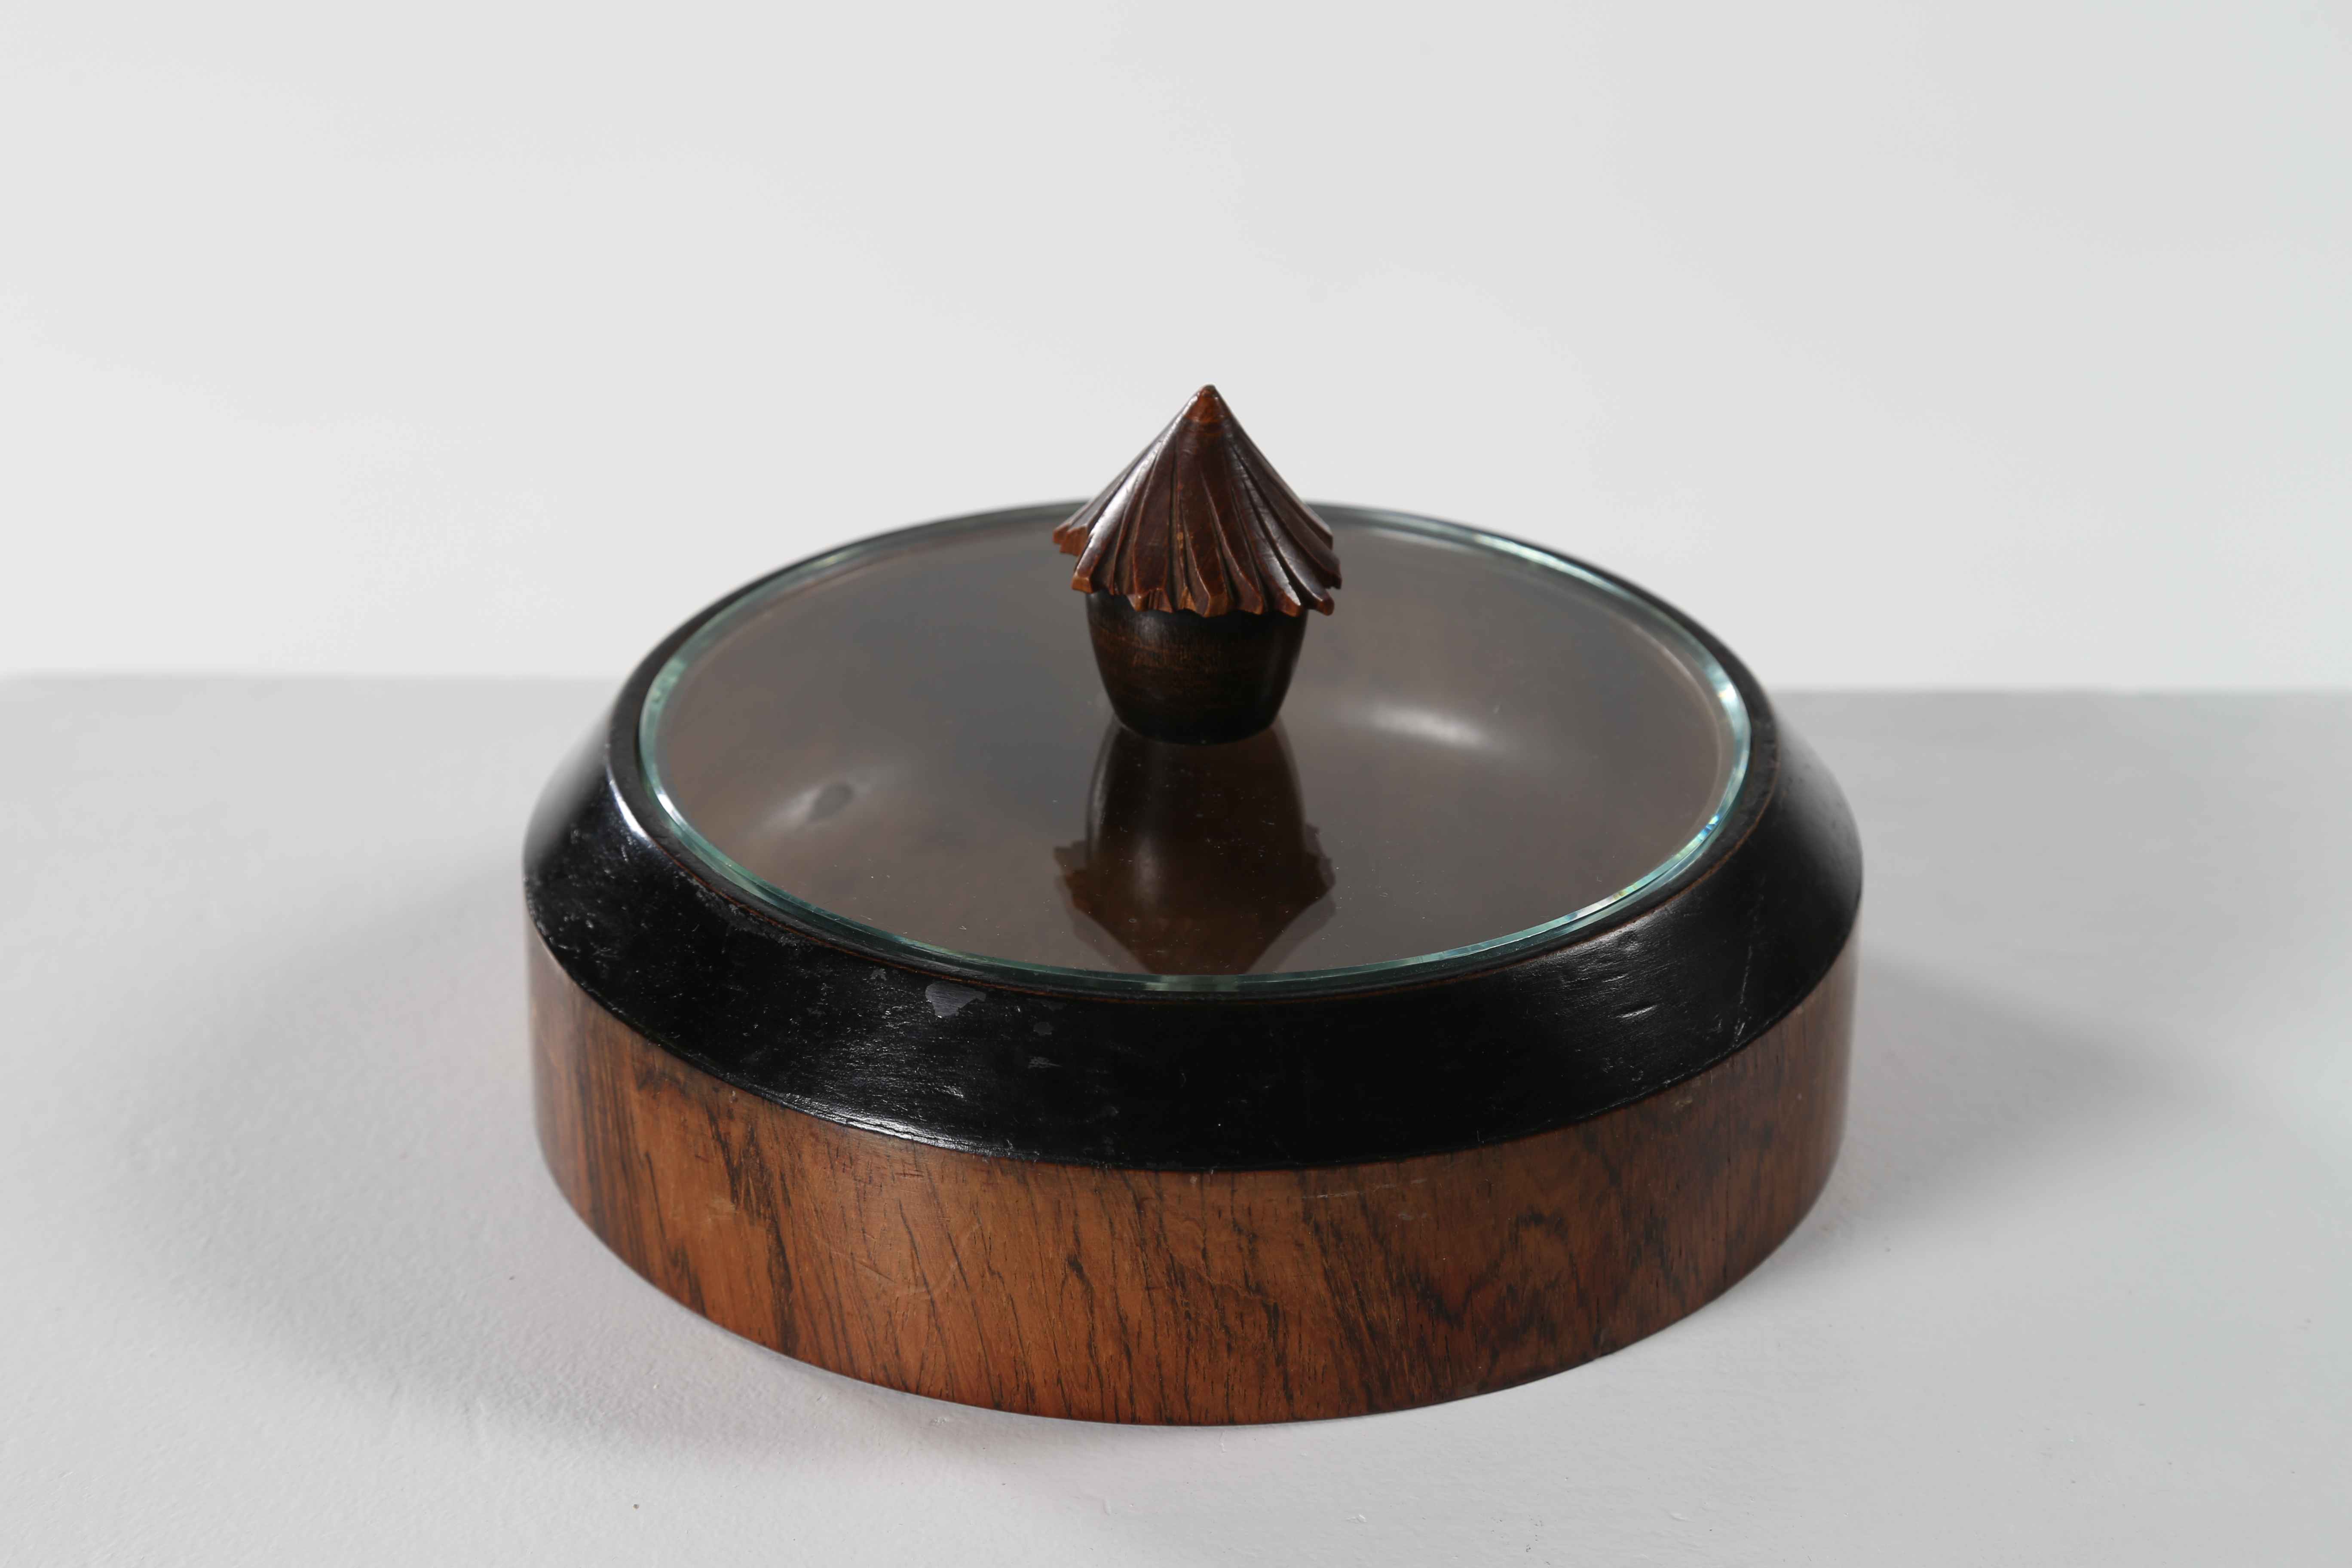 CHIESA PIETRO (1892 - 1948)
For Fontana arte Milan.
Made of carved Swiss pine with a glass lid.